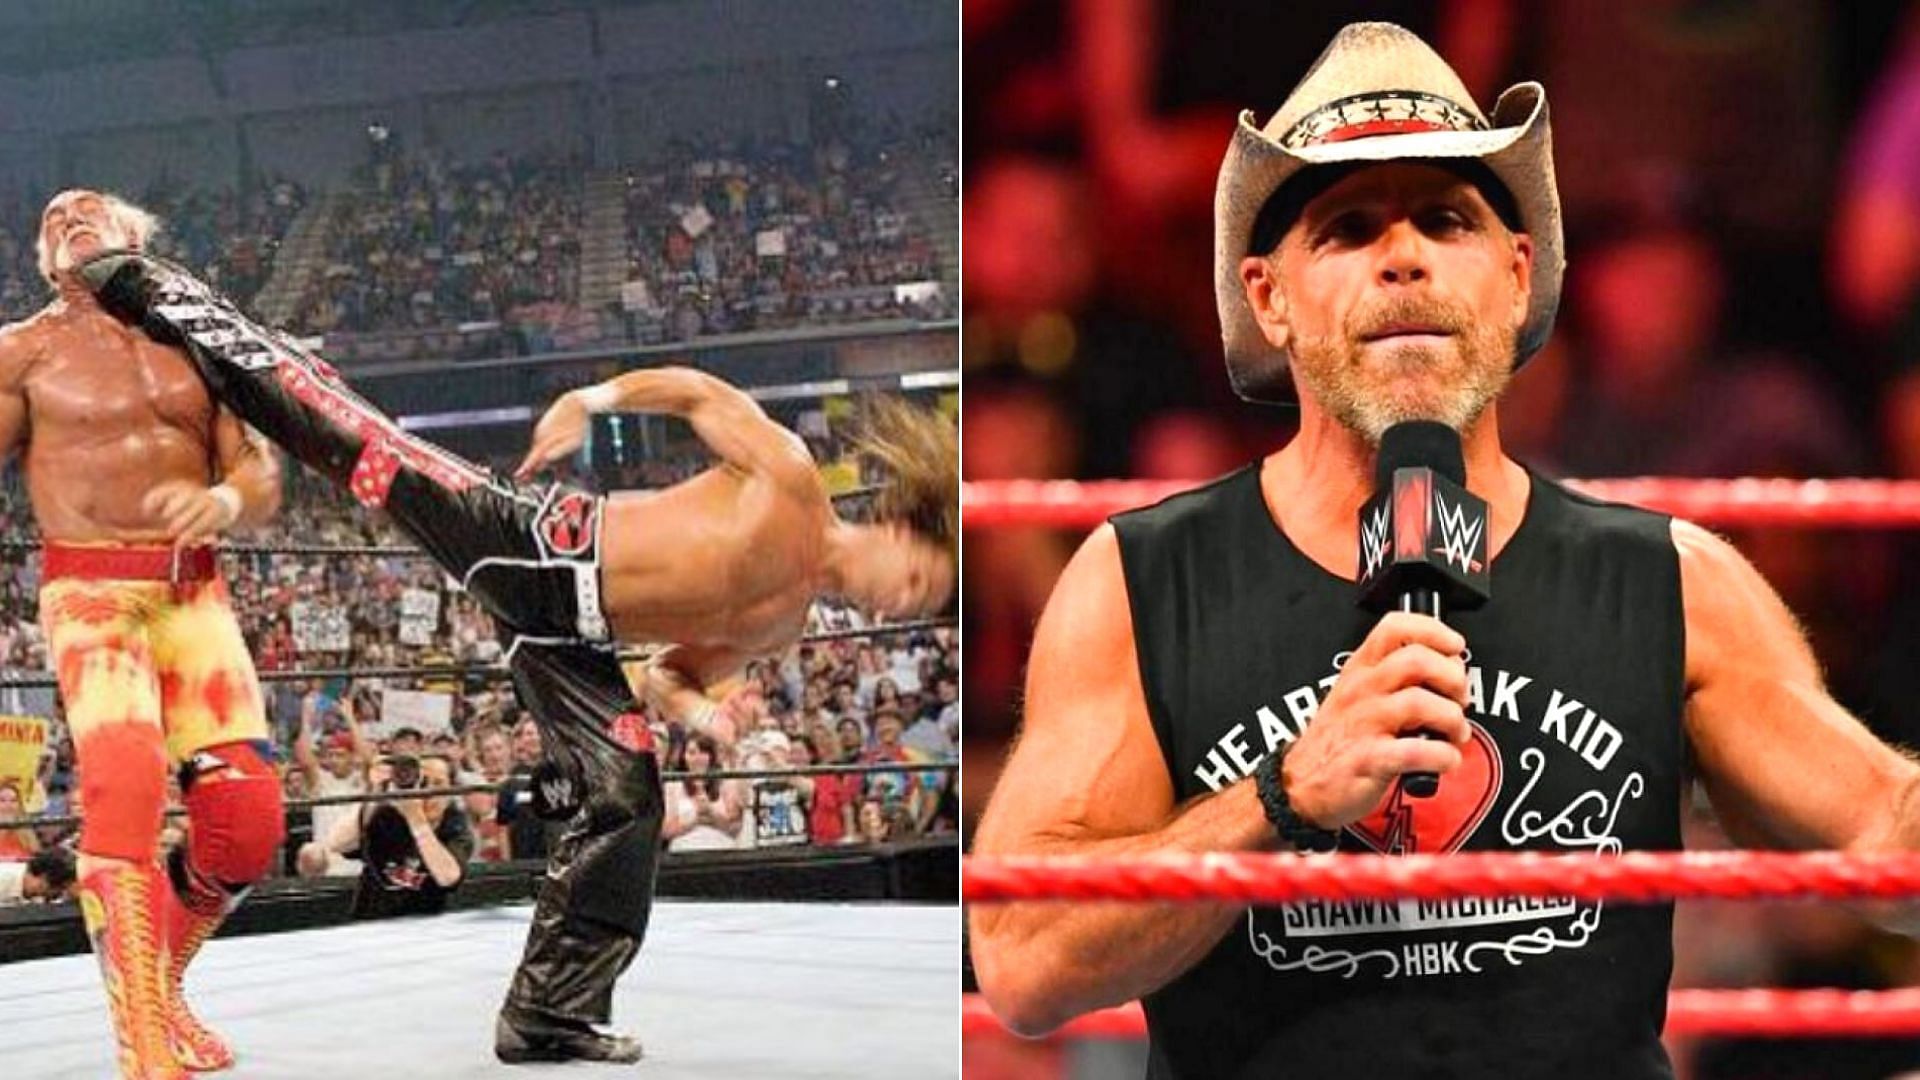 Shawn Michaels&#039; Sweet Chin Music was an iconic finisher